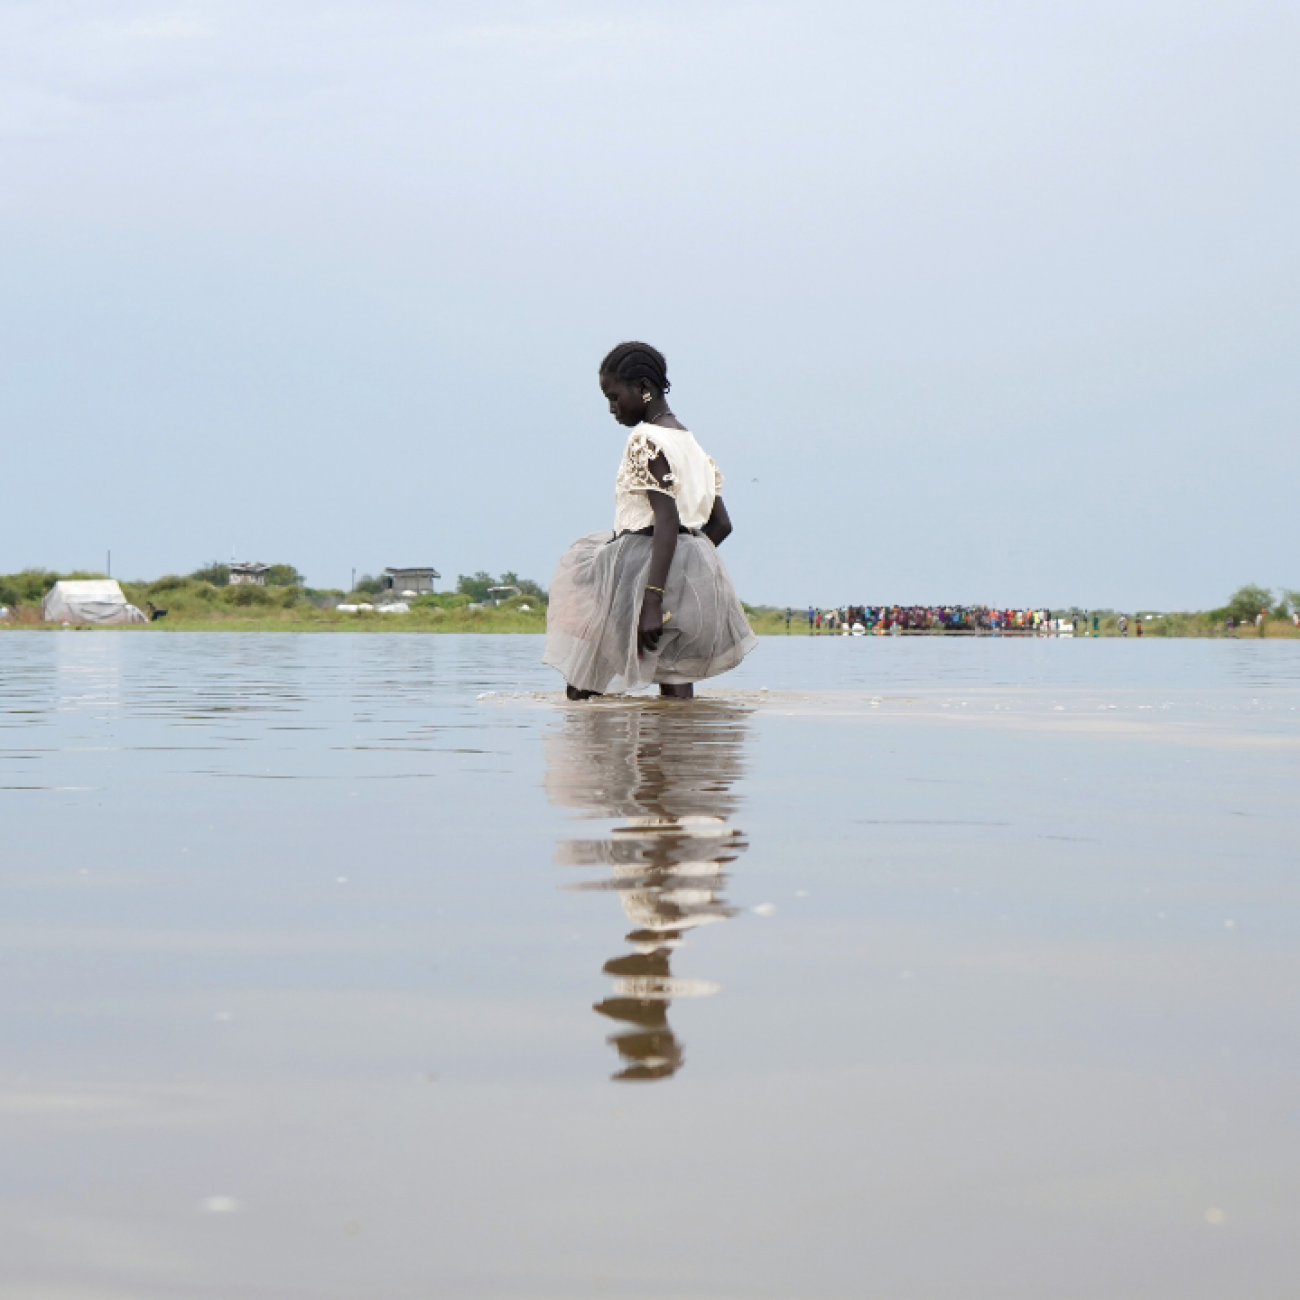 A girl dressed in white walks knee-deep in water after heavy rains and floods in the town of Pibor, Boma state, South Sudan, on November 6, 2019.